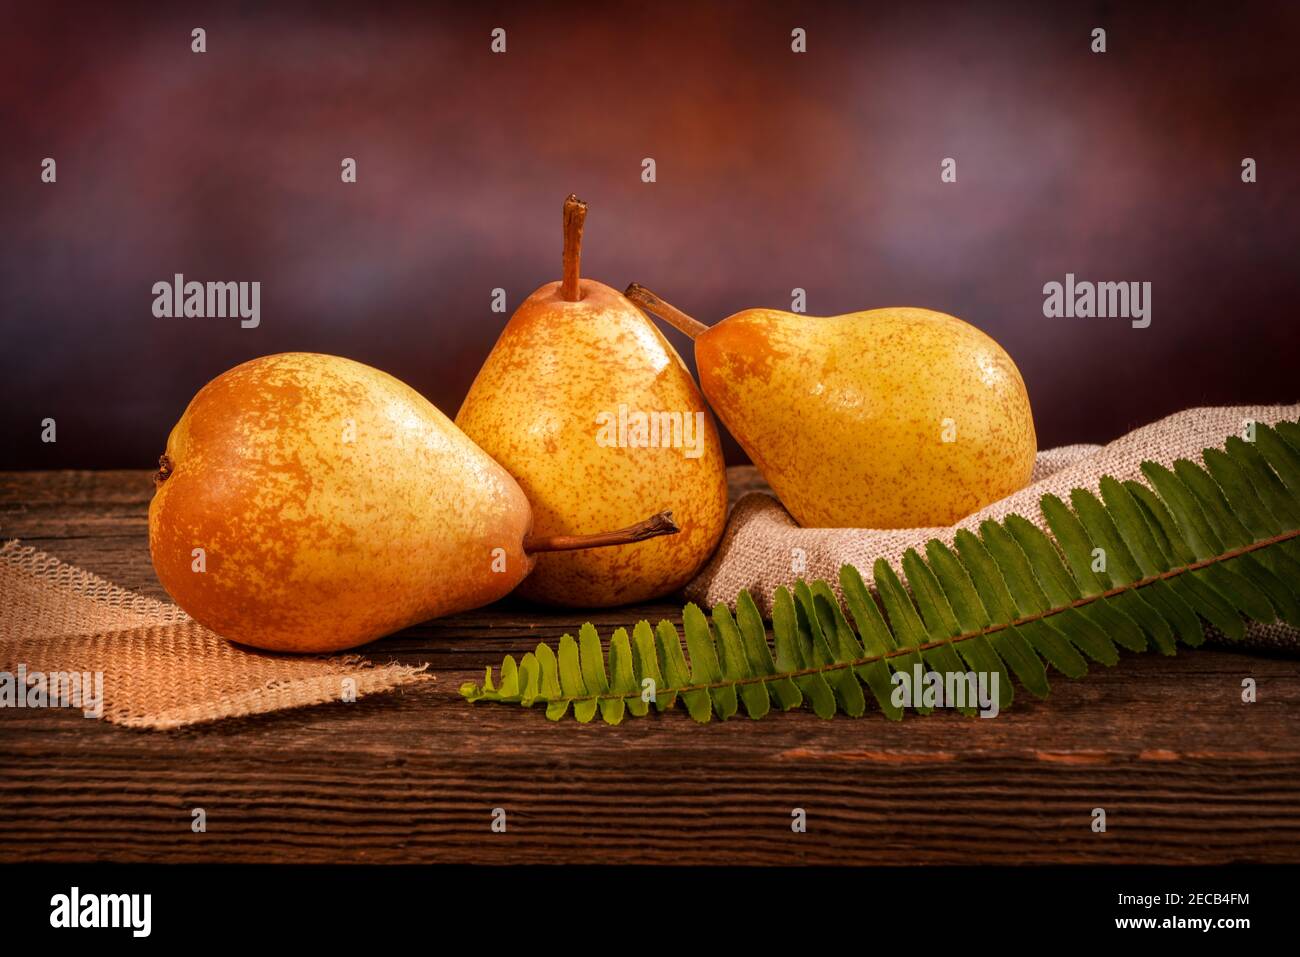 Three yellow pears and a fern on a barn wood table in front of a backdrop Stock Photo